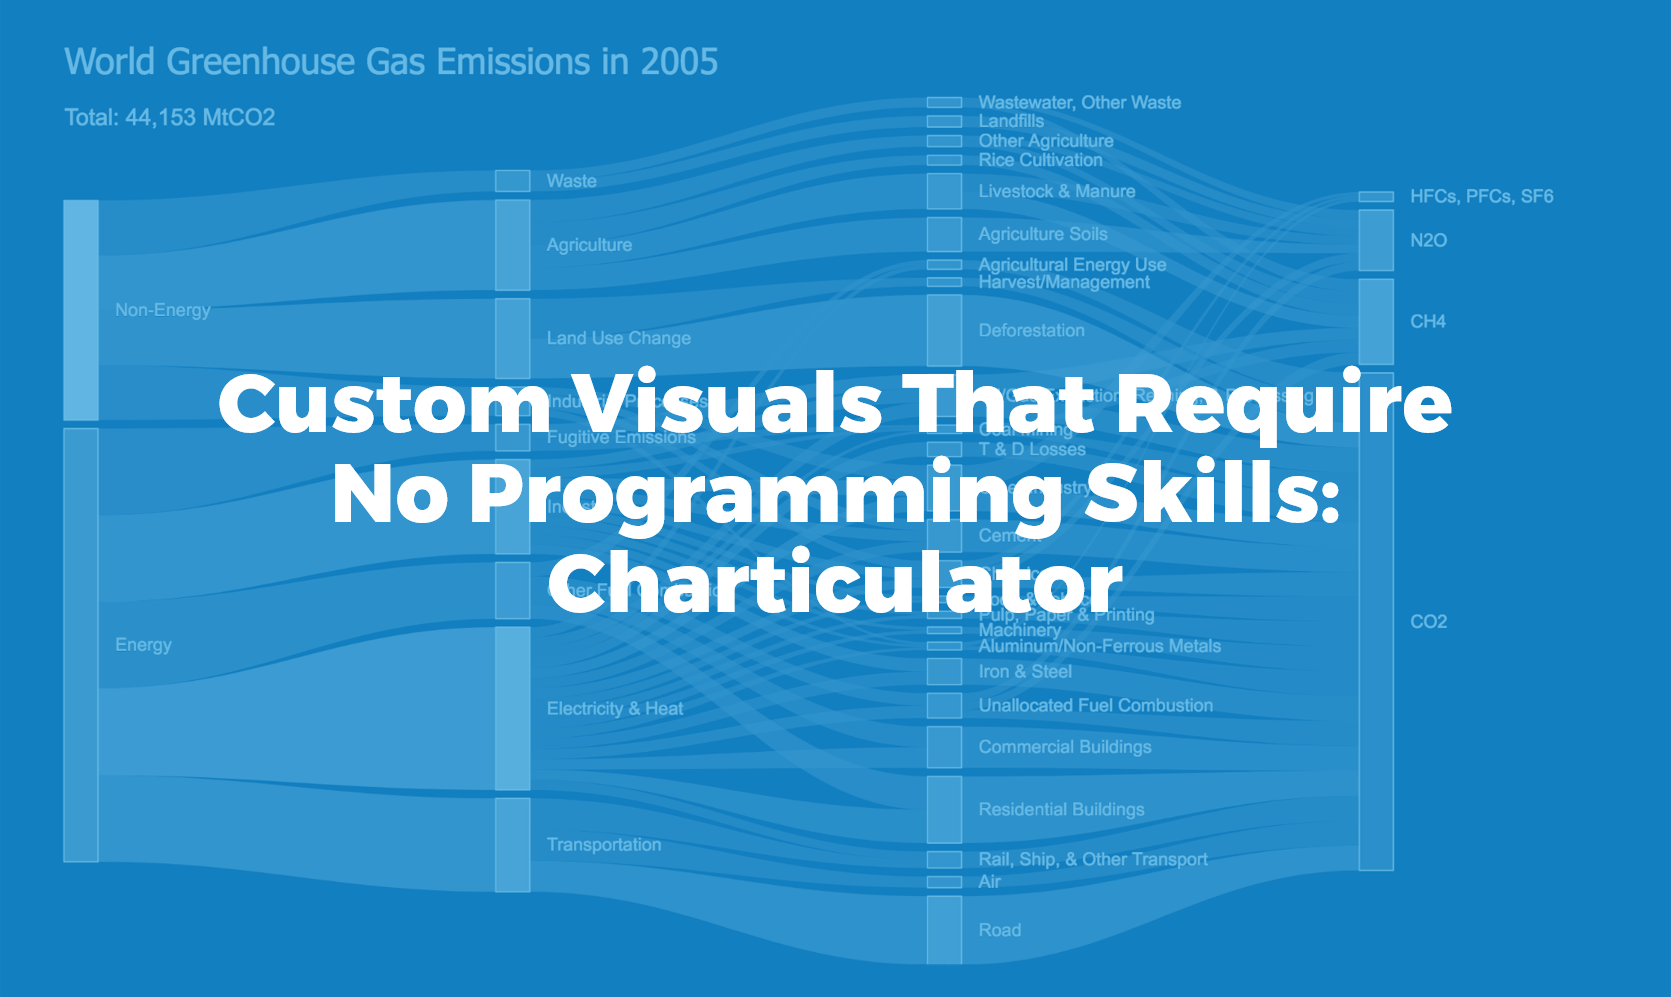 Charticulator: The Microsoft Tool That Creates Visuals Without Code